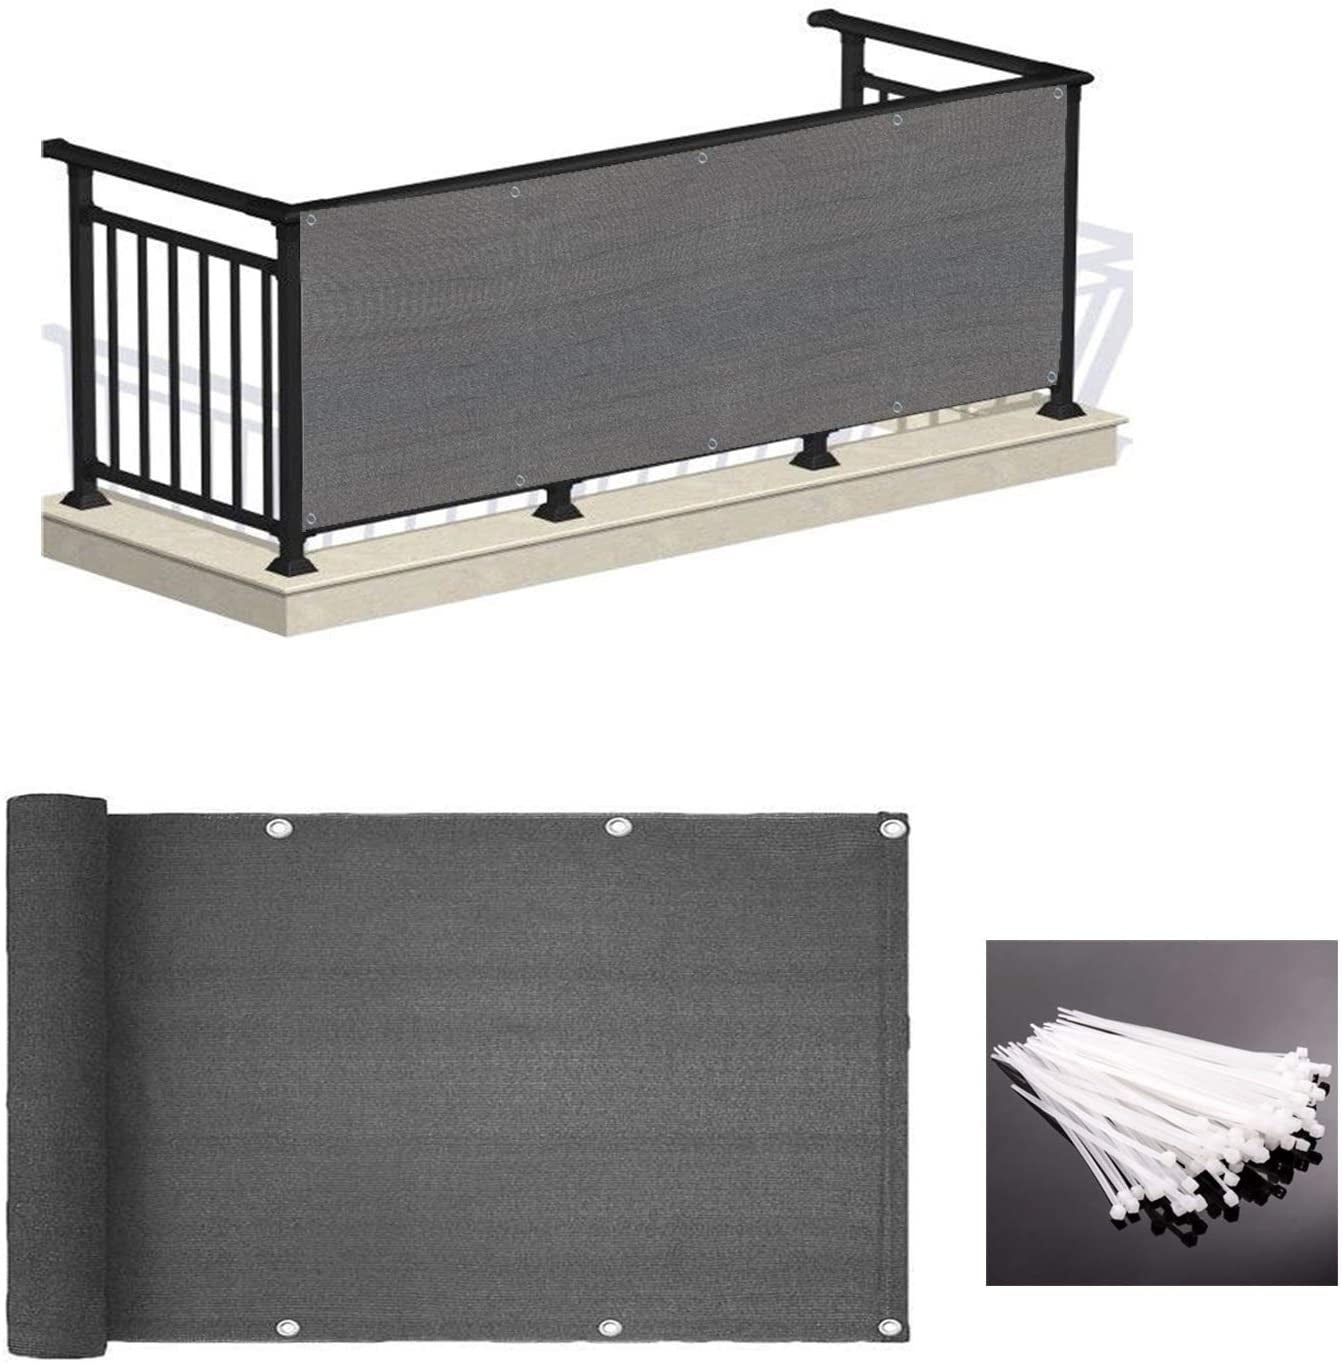 LOVE STORY, LOVE STORY 3' X 10' Charcoal Balcony Screen Privacy Fence Cover UV Protection Weather-Resistant 3 FT Height Shield for Deck, Patio, Backyard, Outdoor Pool, Porch, Railing